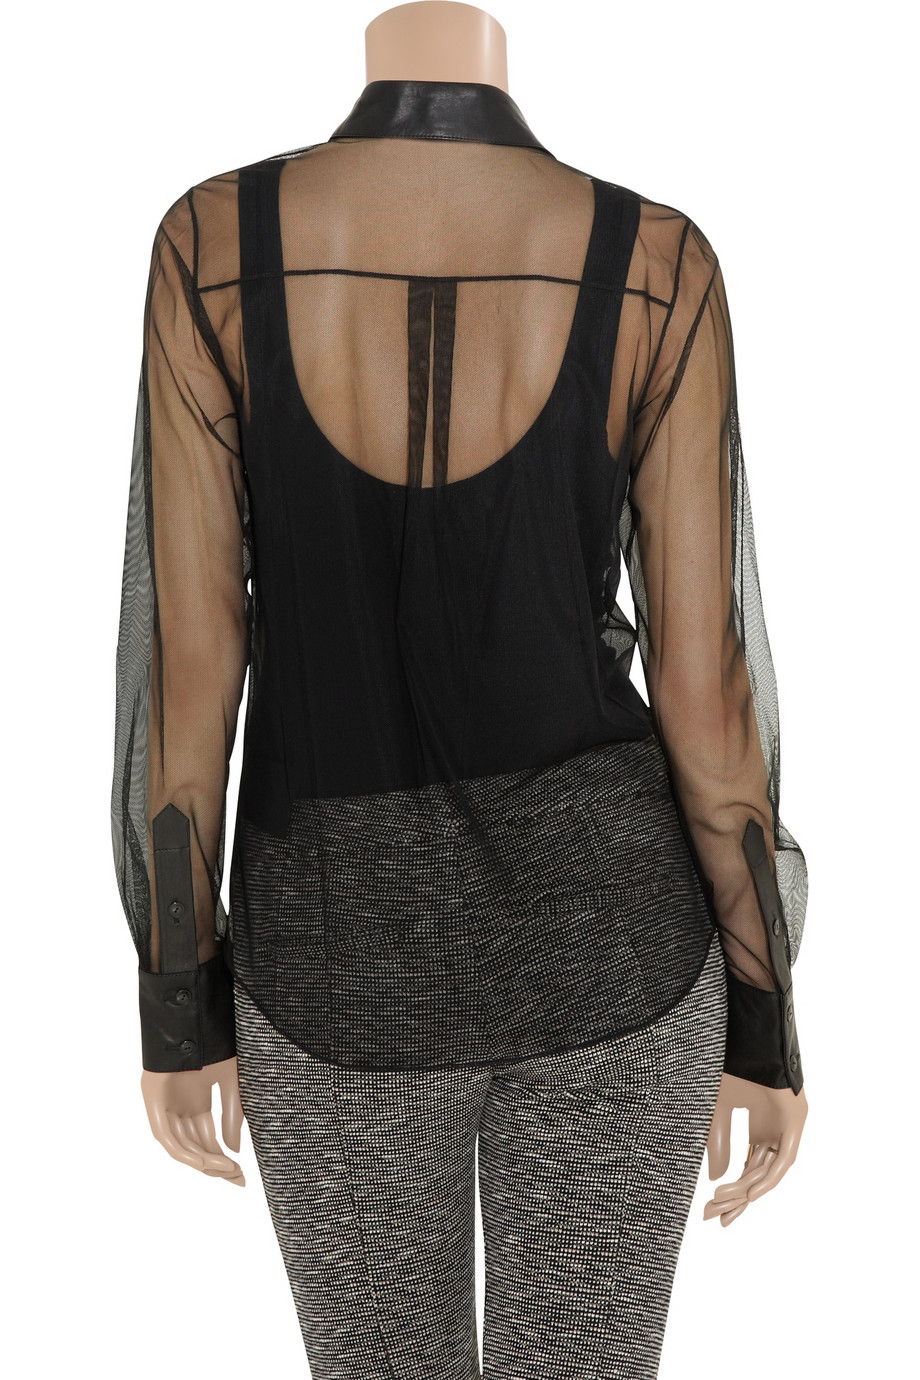 Alexander Wang Leather Trimmed Tulle Shirt in Black - Lyst